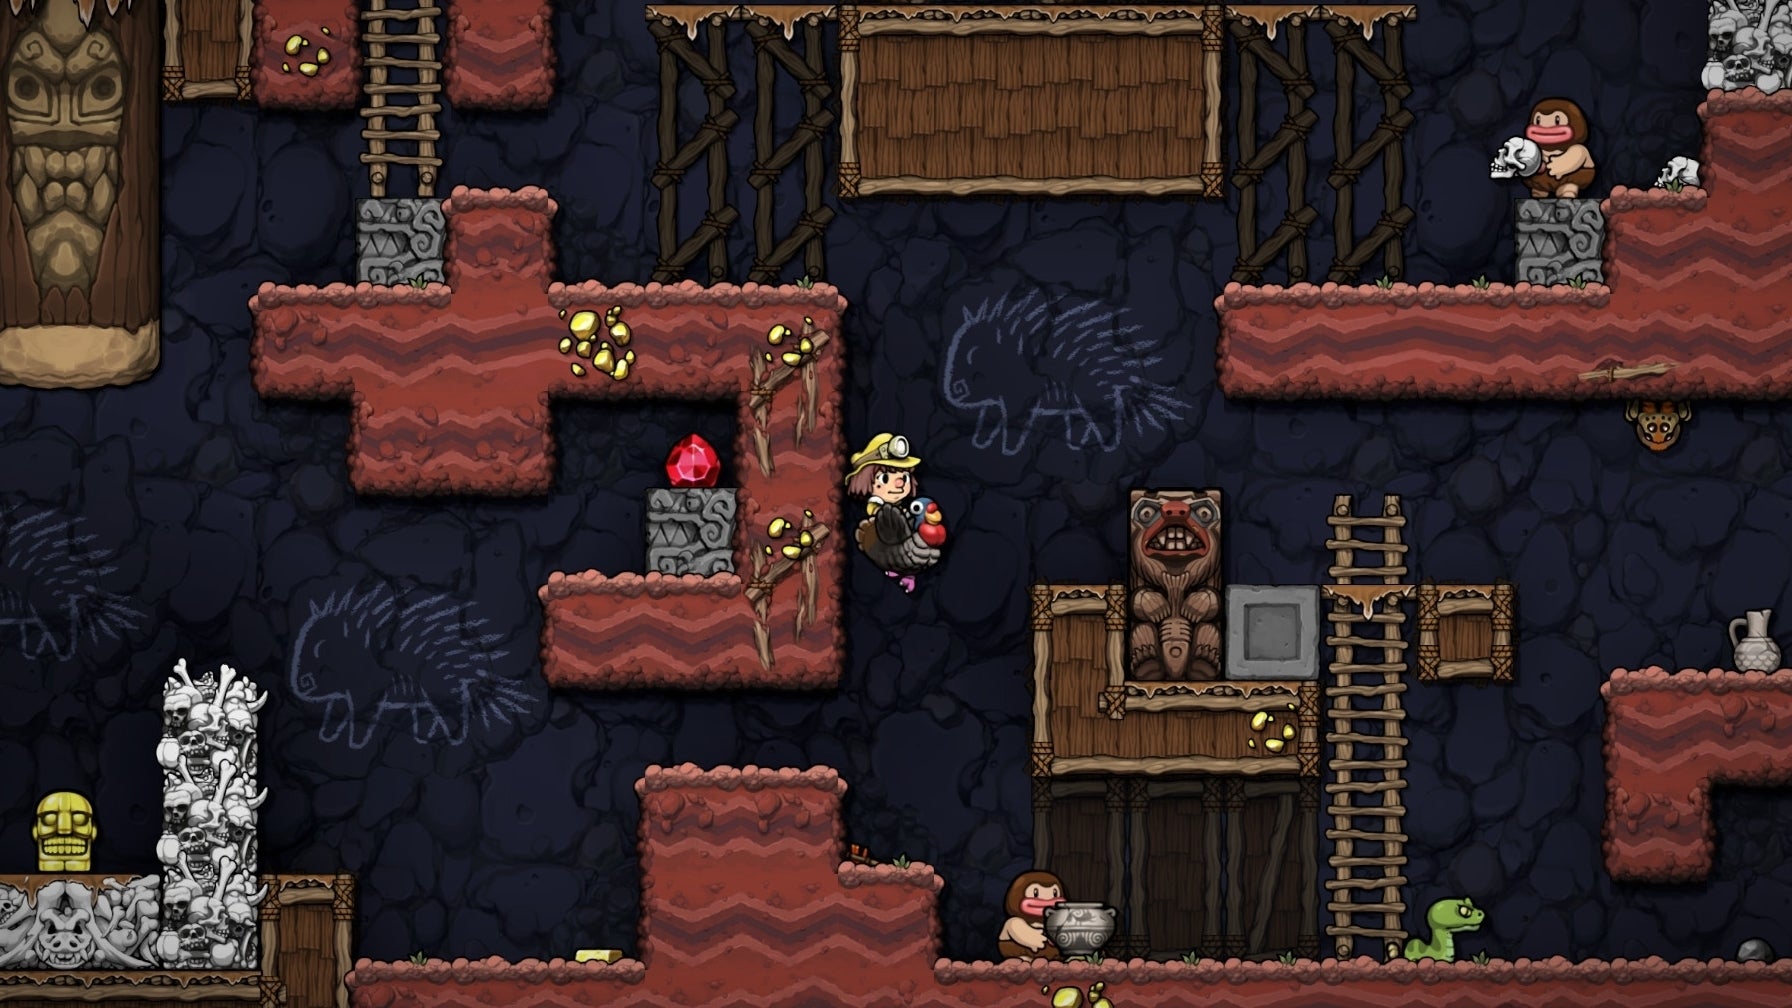 Image for Spelunky 2 arriving on PC "a few weeks" after PlayStation 4 version